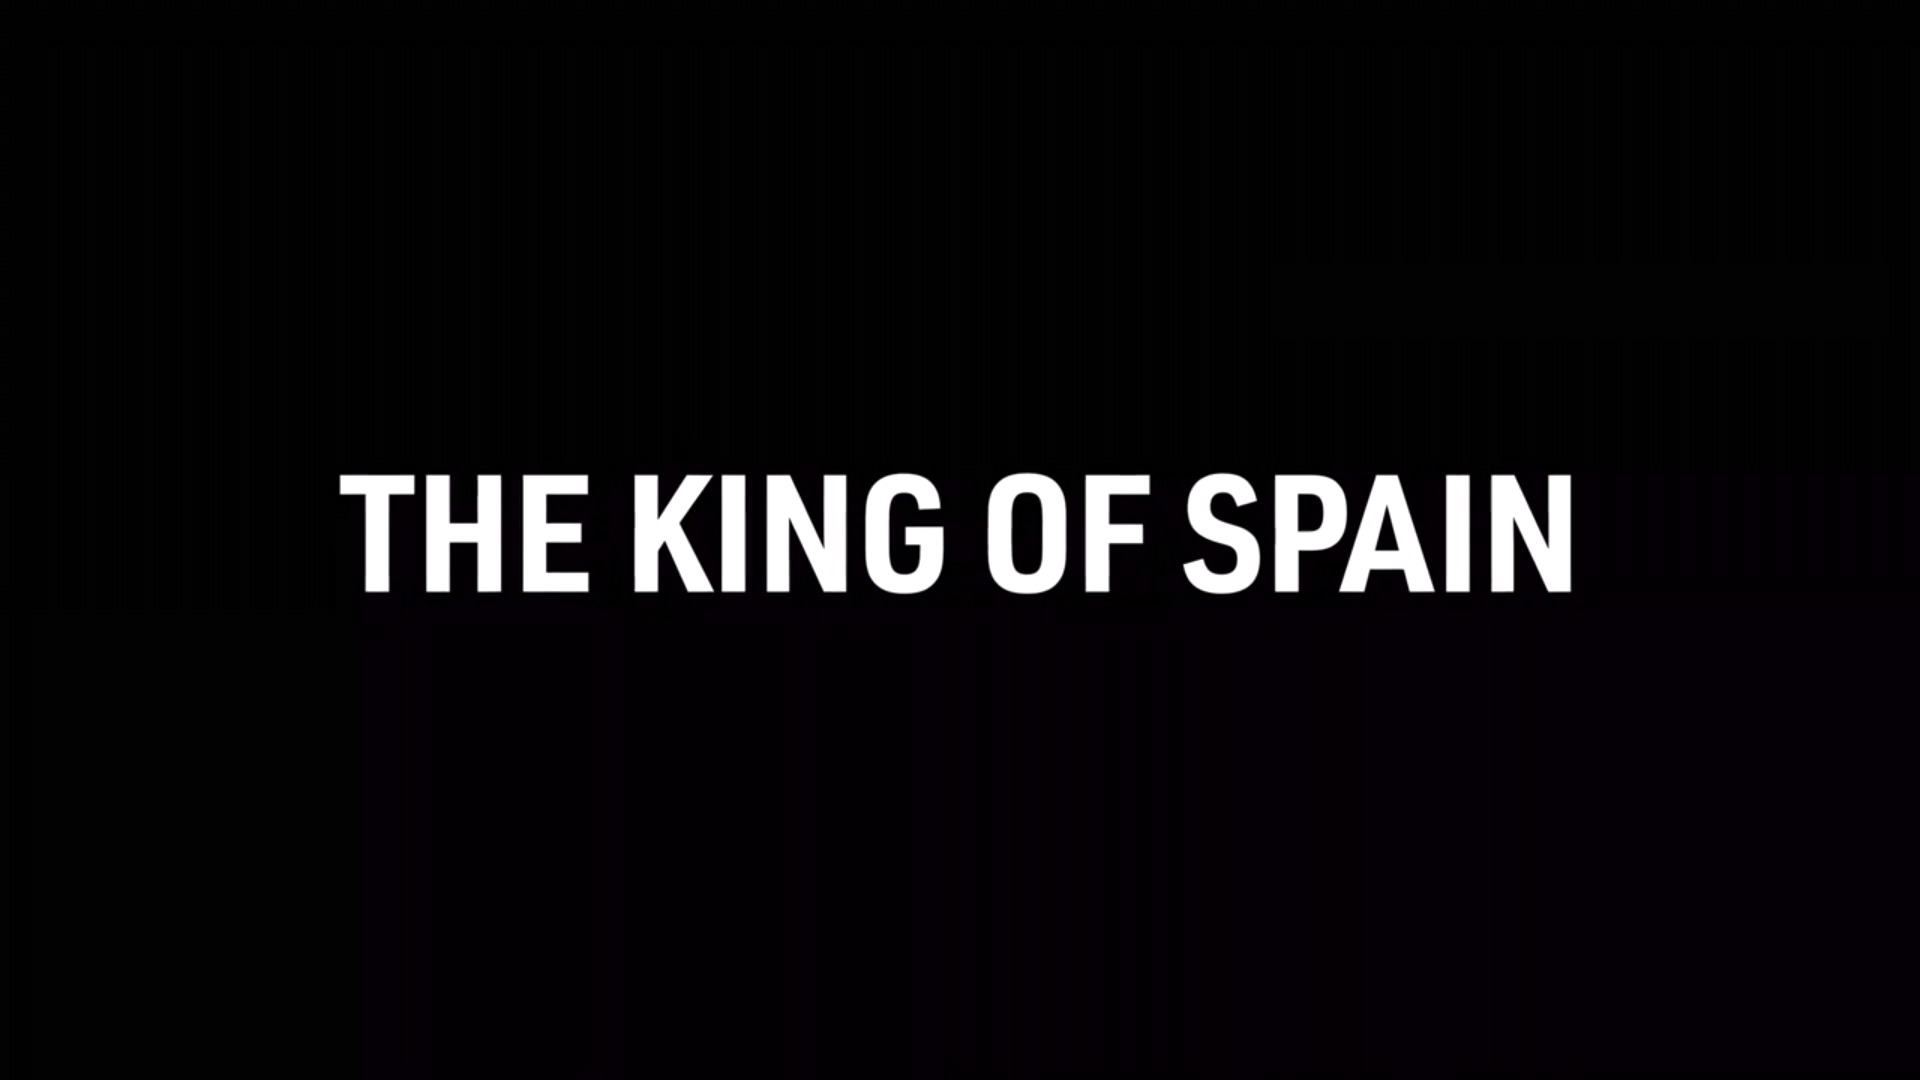 Drive to Survive - F1 Netflix series season one episode two - The King of Spain